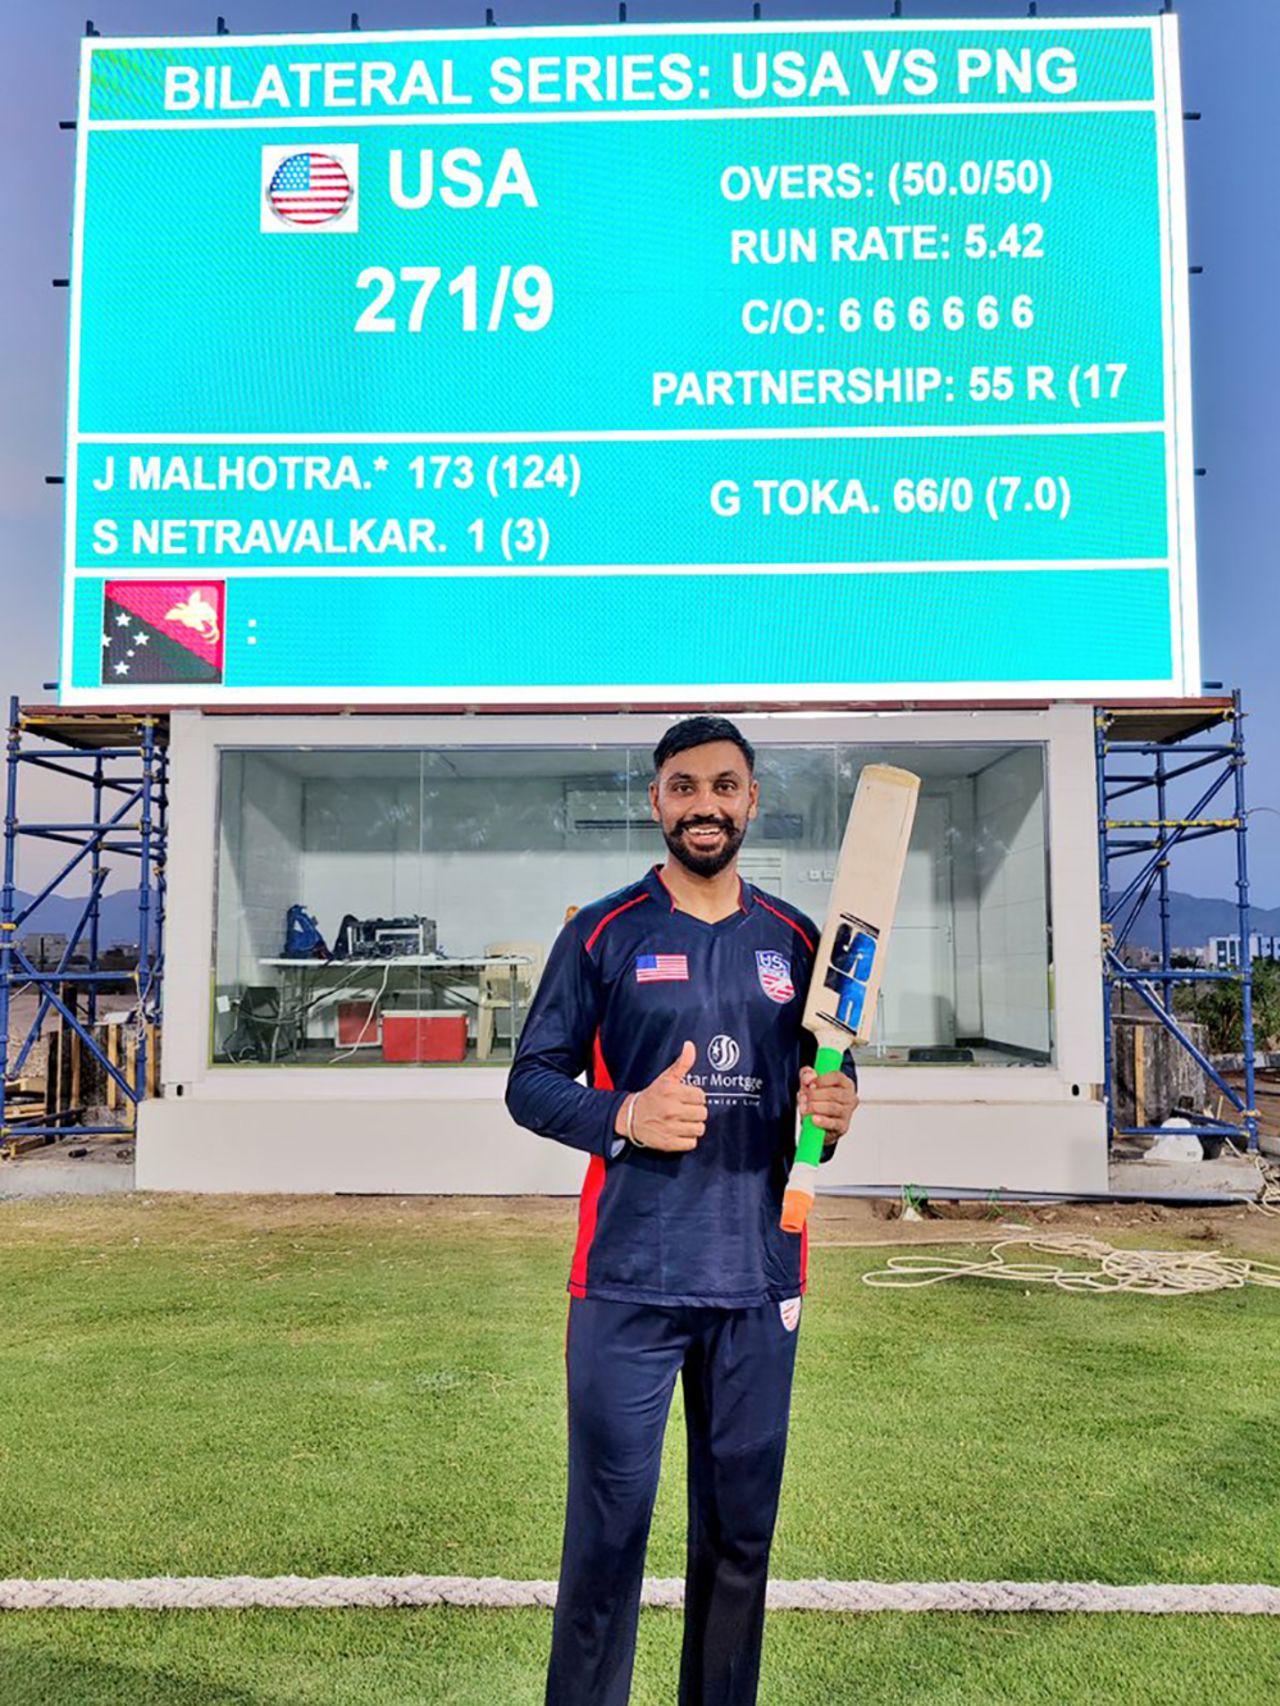 Jaskaran Malhotra smashed six sixes in an over during his unbeaten 173, Papua New Guinea vs United States of America, 2nd ODI, Al Amerat, September 9, 2021